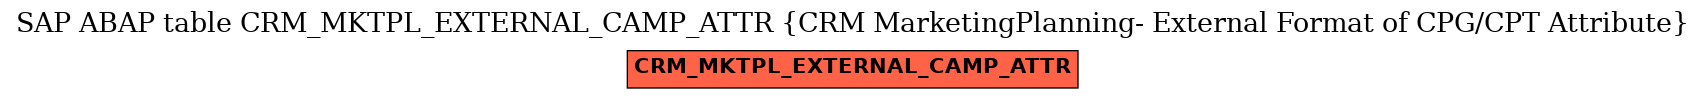 E-R Diagram for table CRM_MKTPL_EXTERNAL_CAMP_ATTR (CRM MarketingPlanning- External Format of CPG/CPT Attribute)